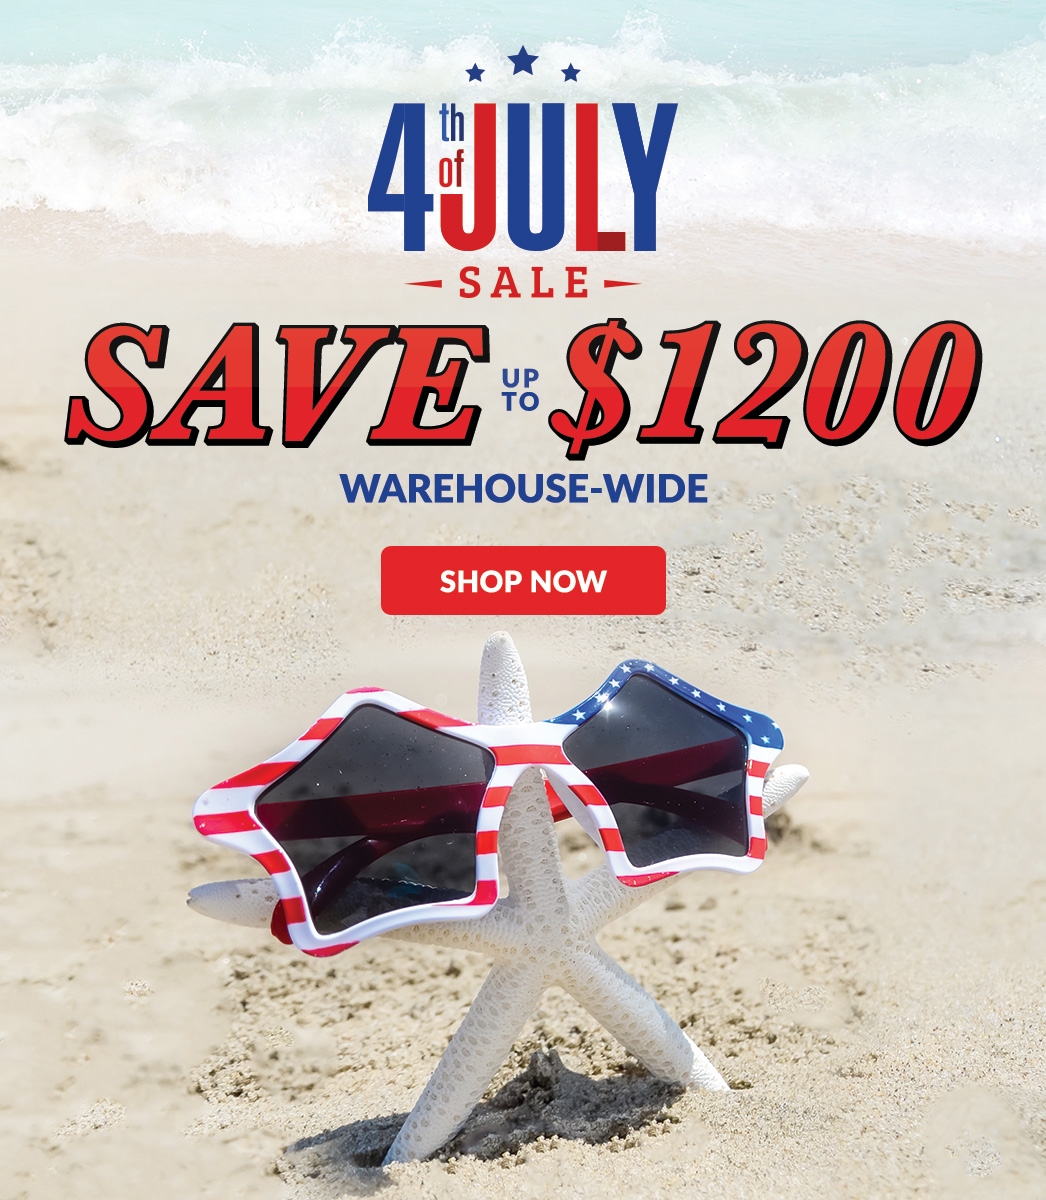 4th of July Sale Save up to $1200 Warehouse-wide